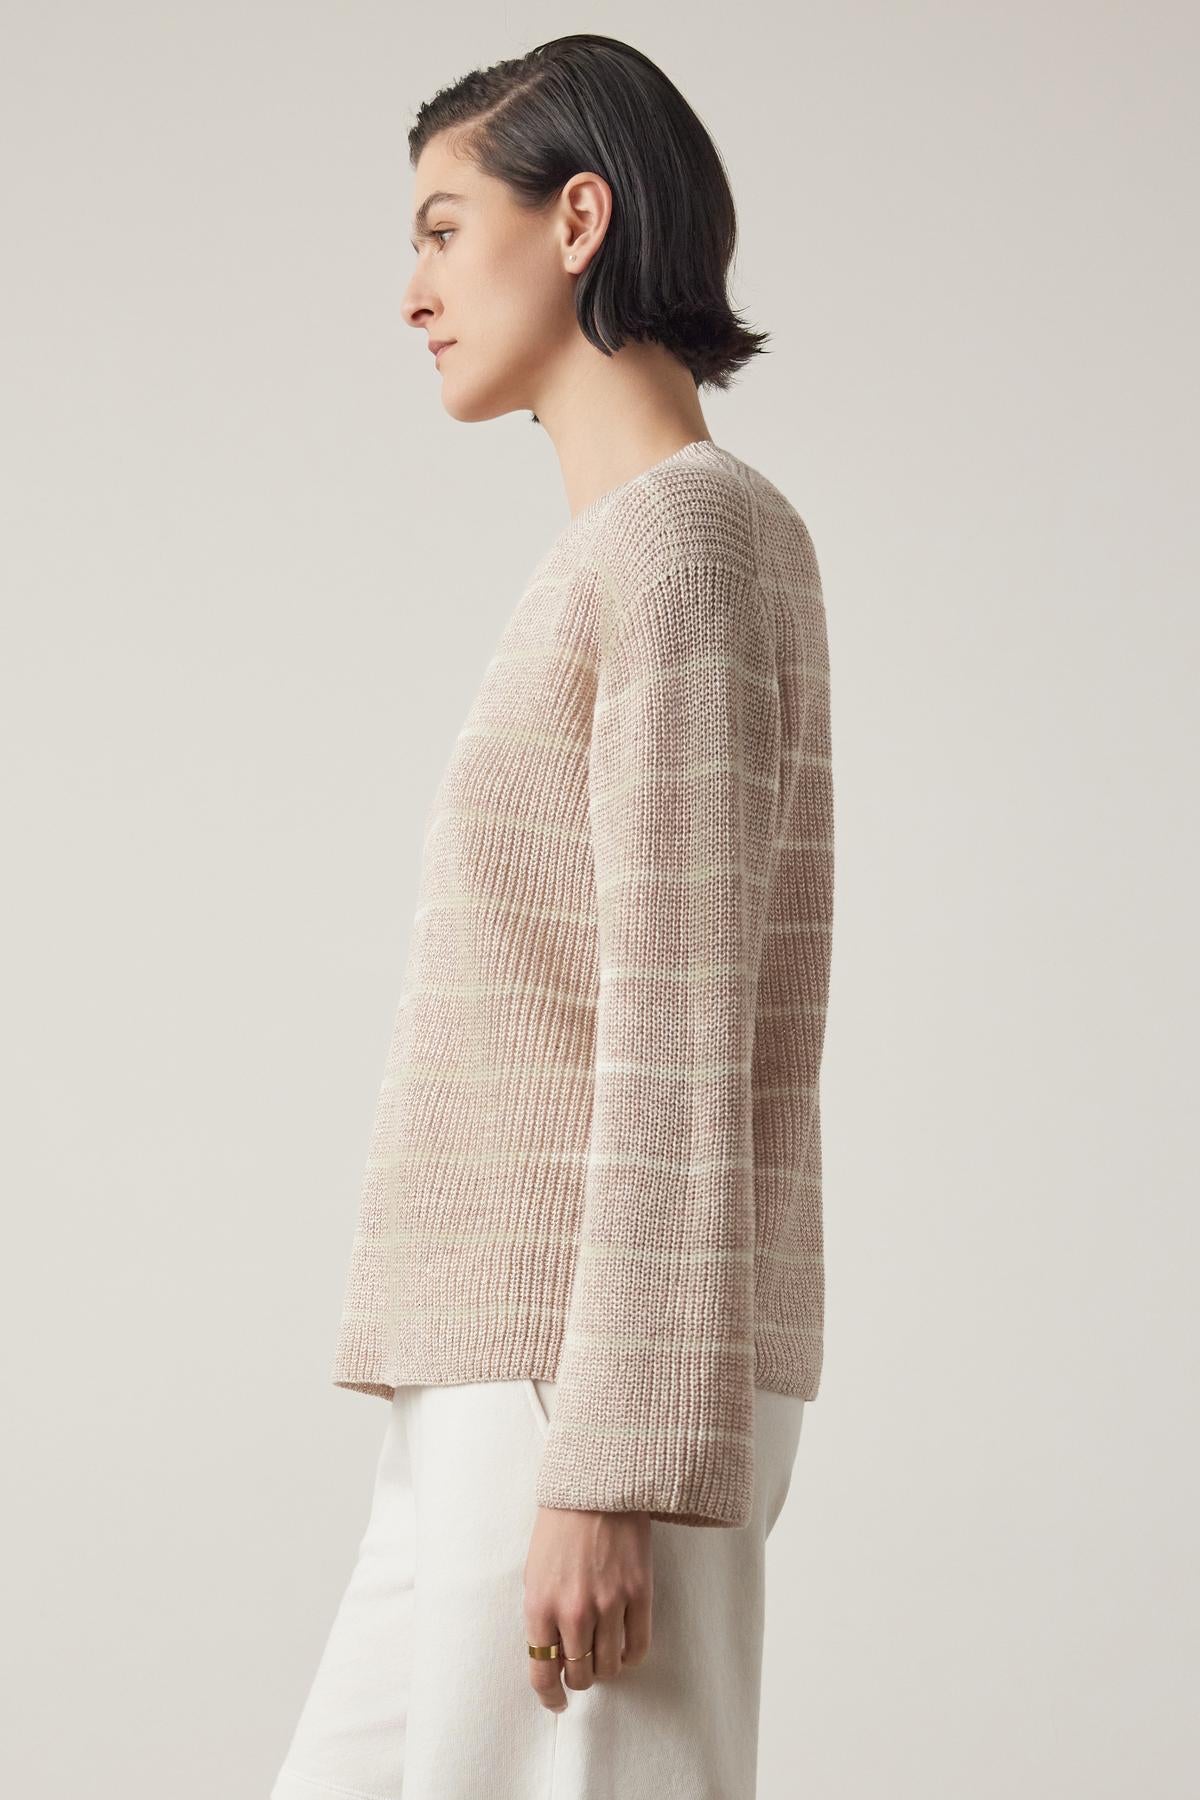 Side profile of a person with short dark hair wearing a beige textured Indio Linen Sweater from Velvet by Jenny Graham and white pants against a light background.-36863294996673